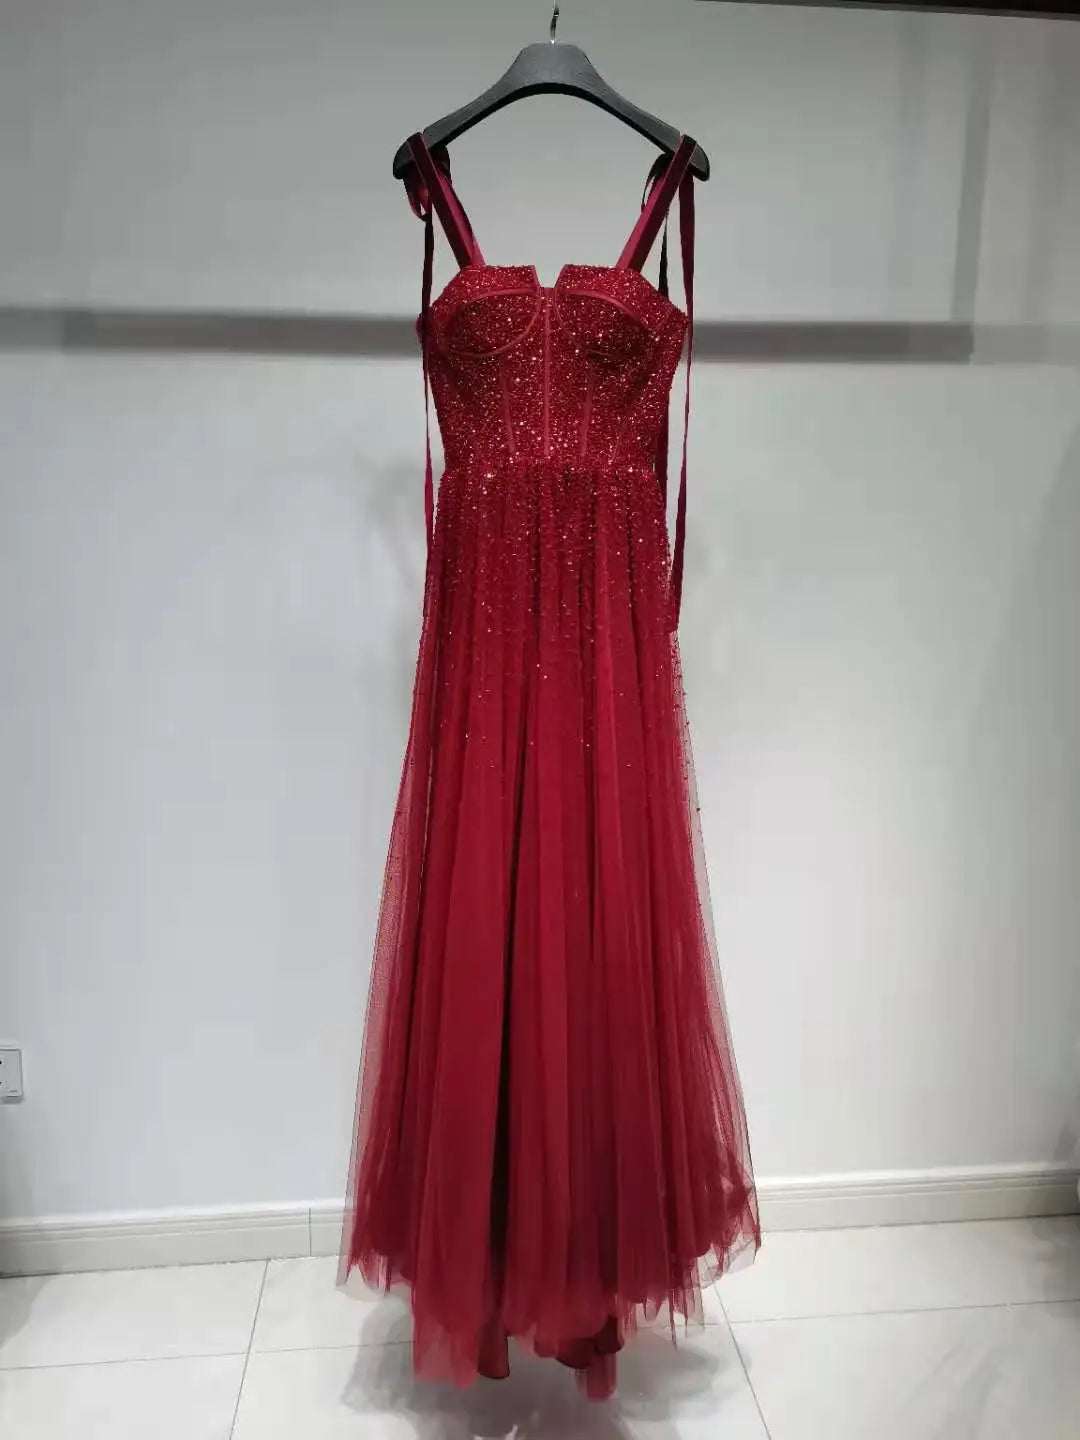 Red Luxury Gowns Fashion Ladies Partydress Gallus With Diamond A-Line Formal Sexy Evening Dresses For Women Wedding